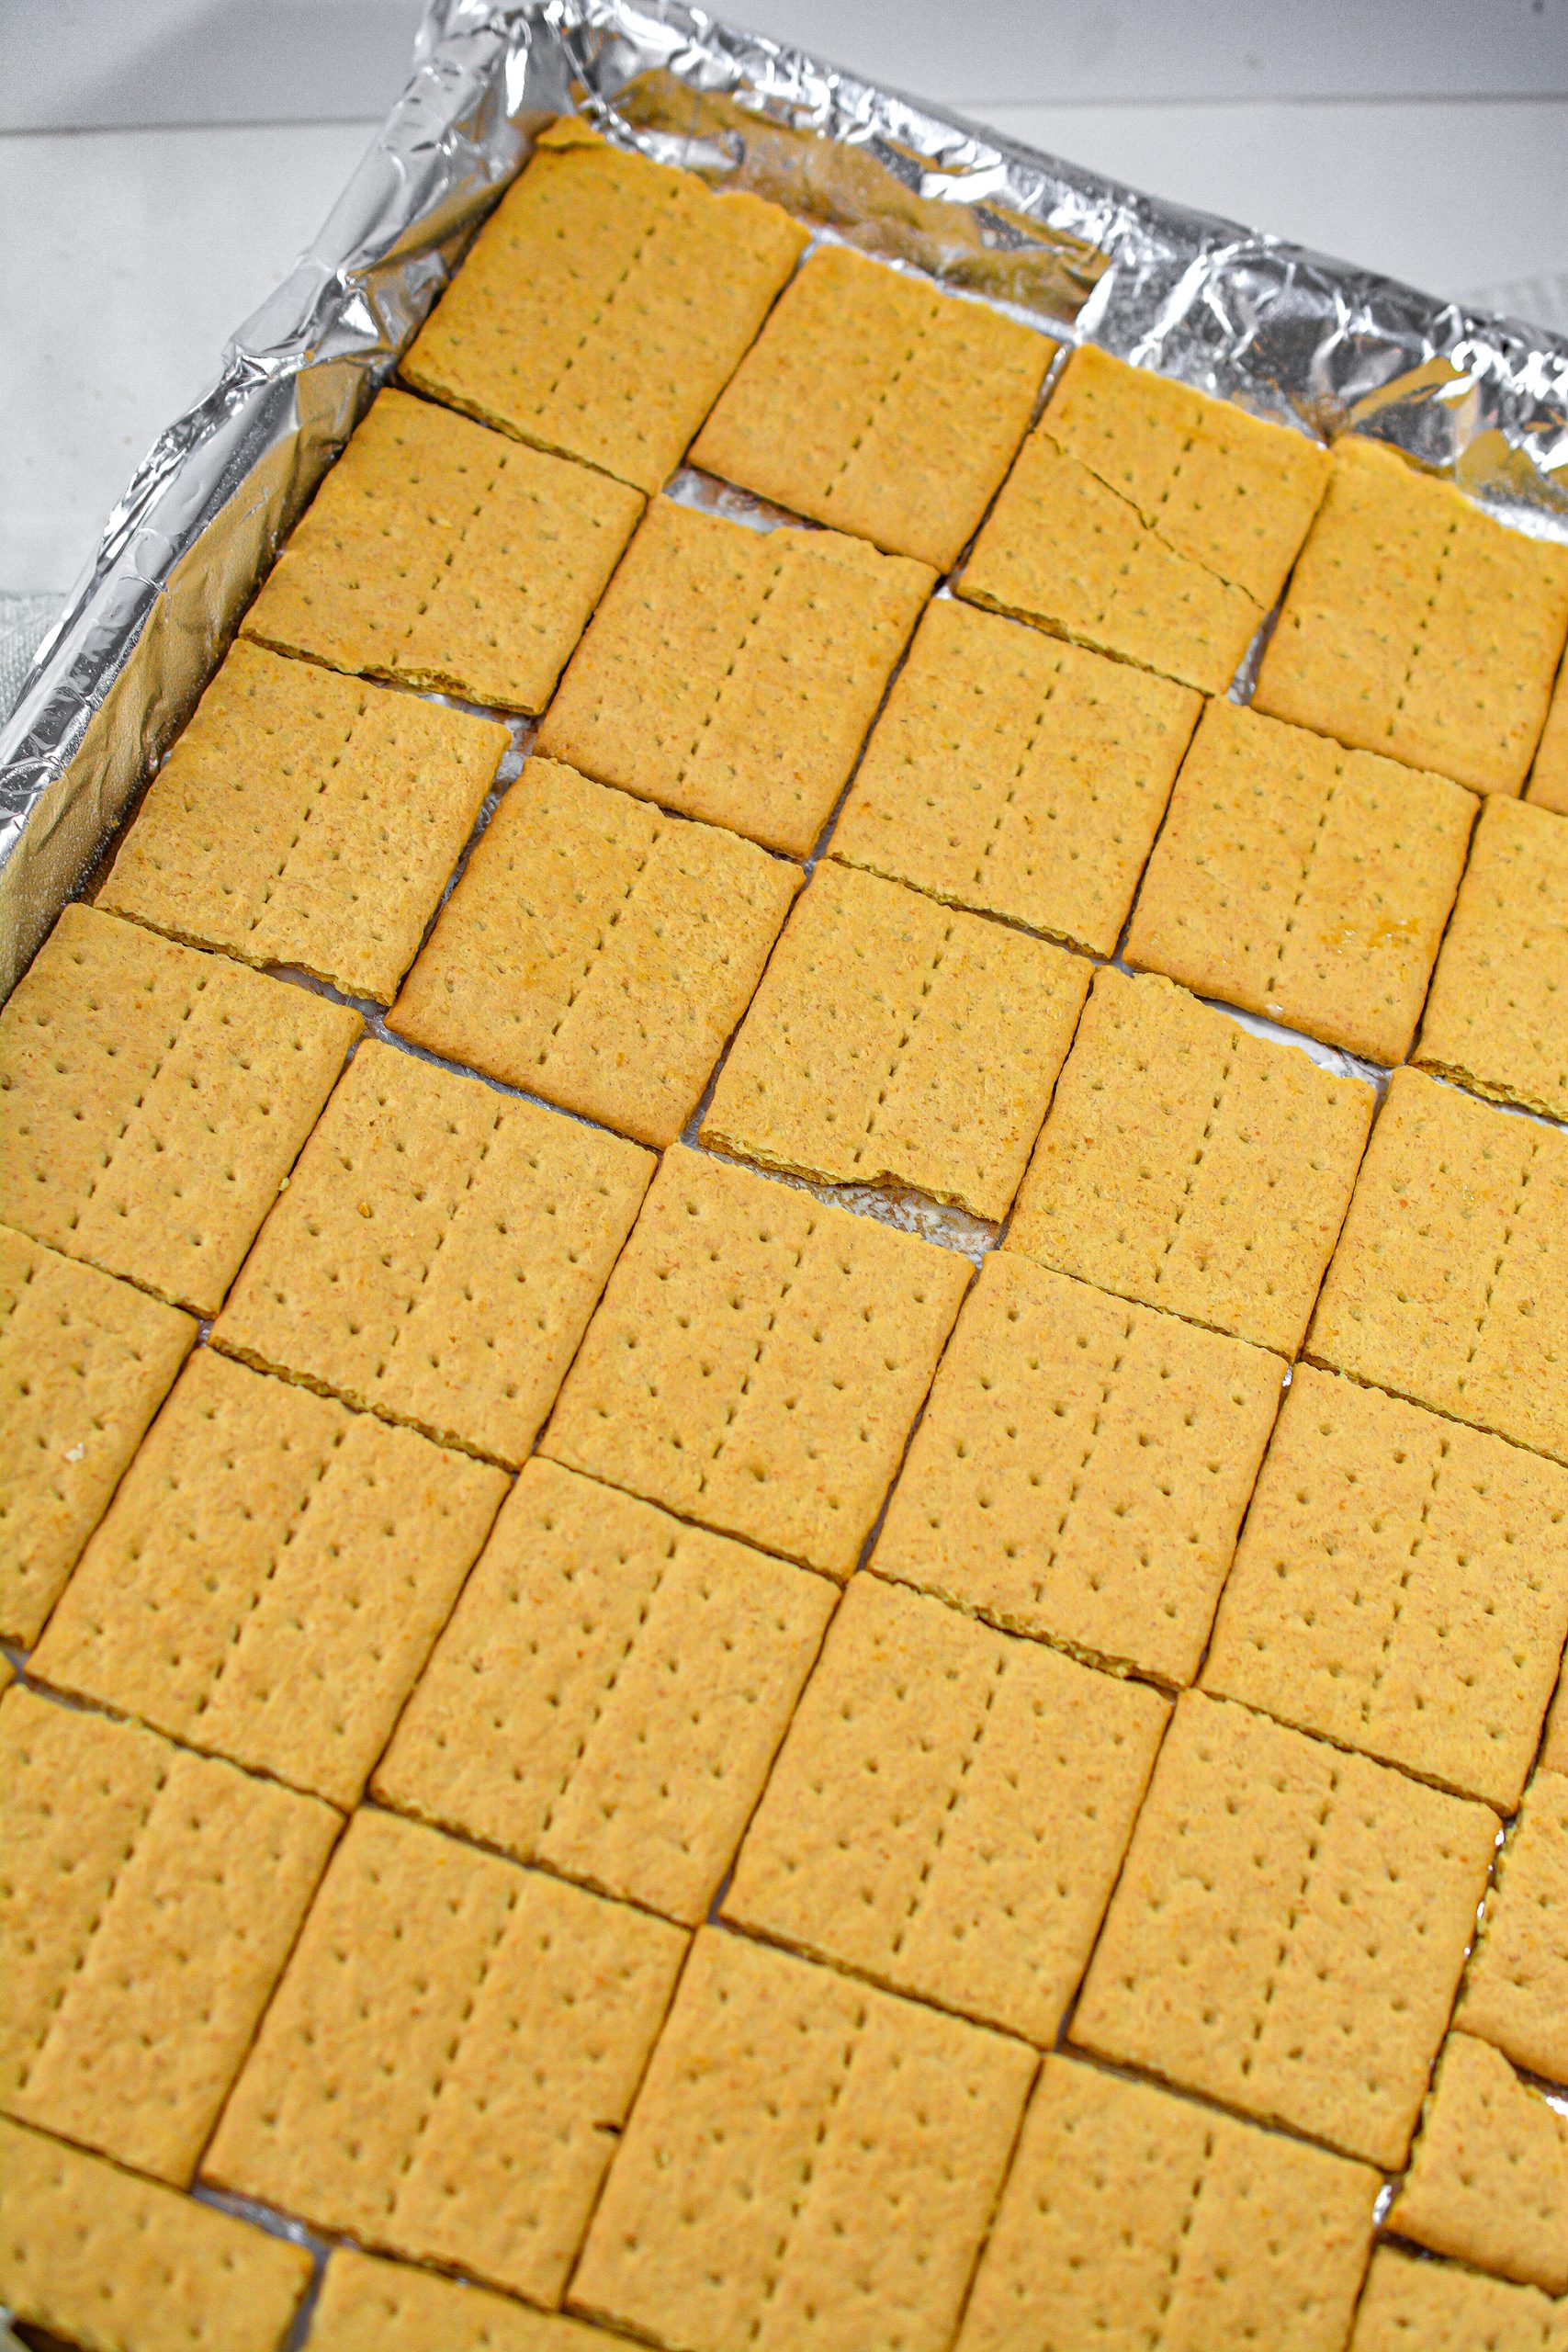 Spread the graham cracker squares in a solid layer on the baking sheet.